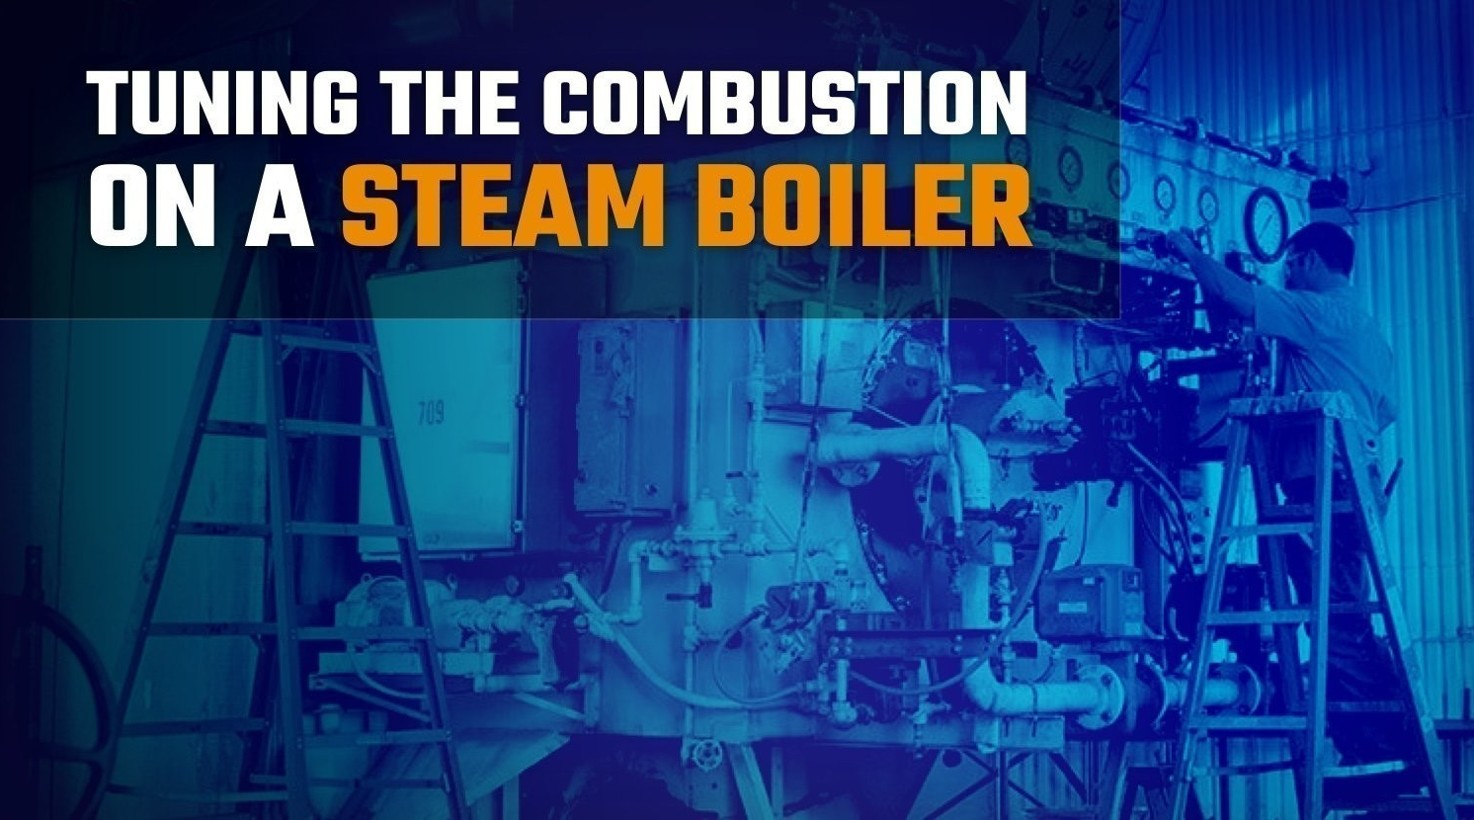 Tuning the Combustion on a Steam Boiler